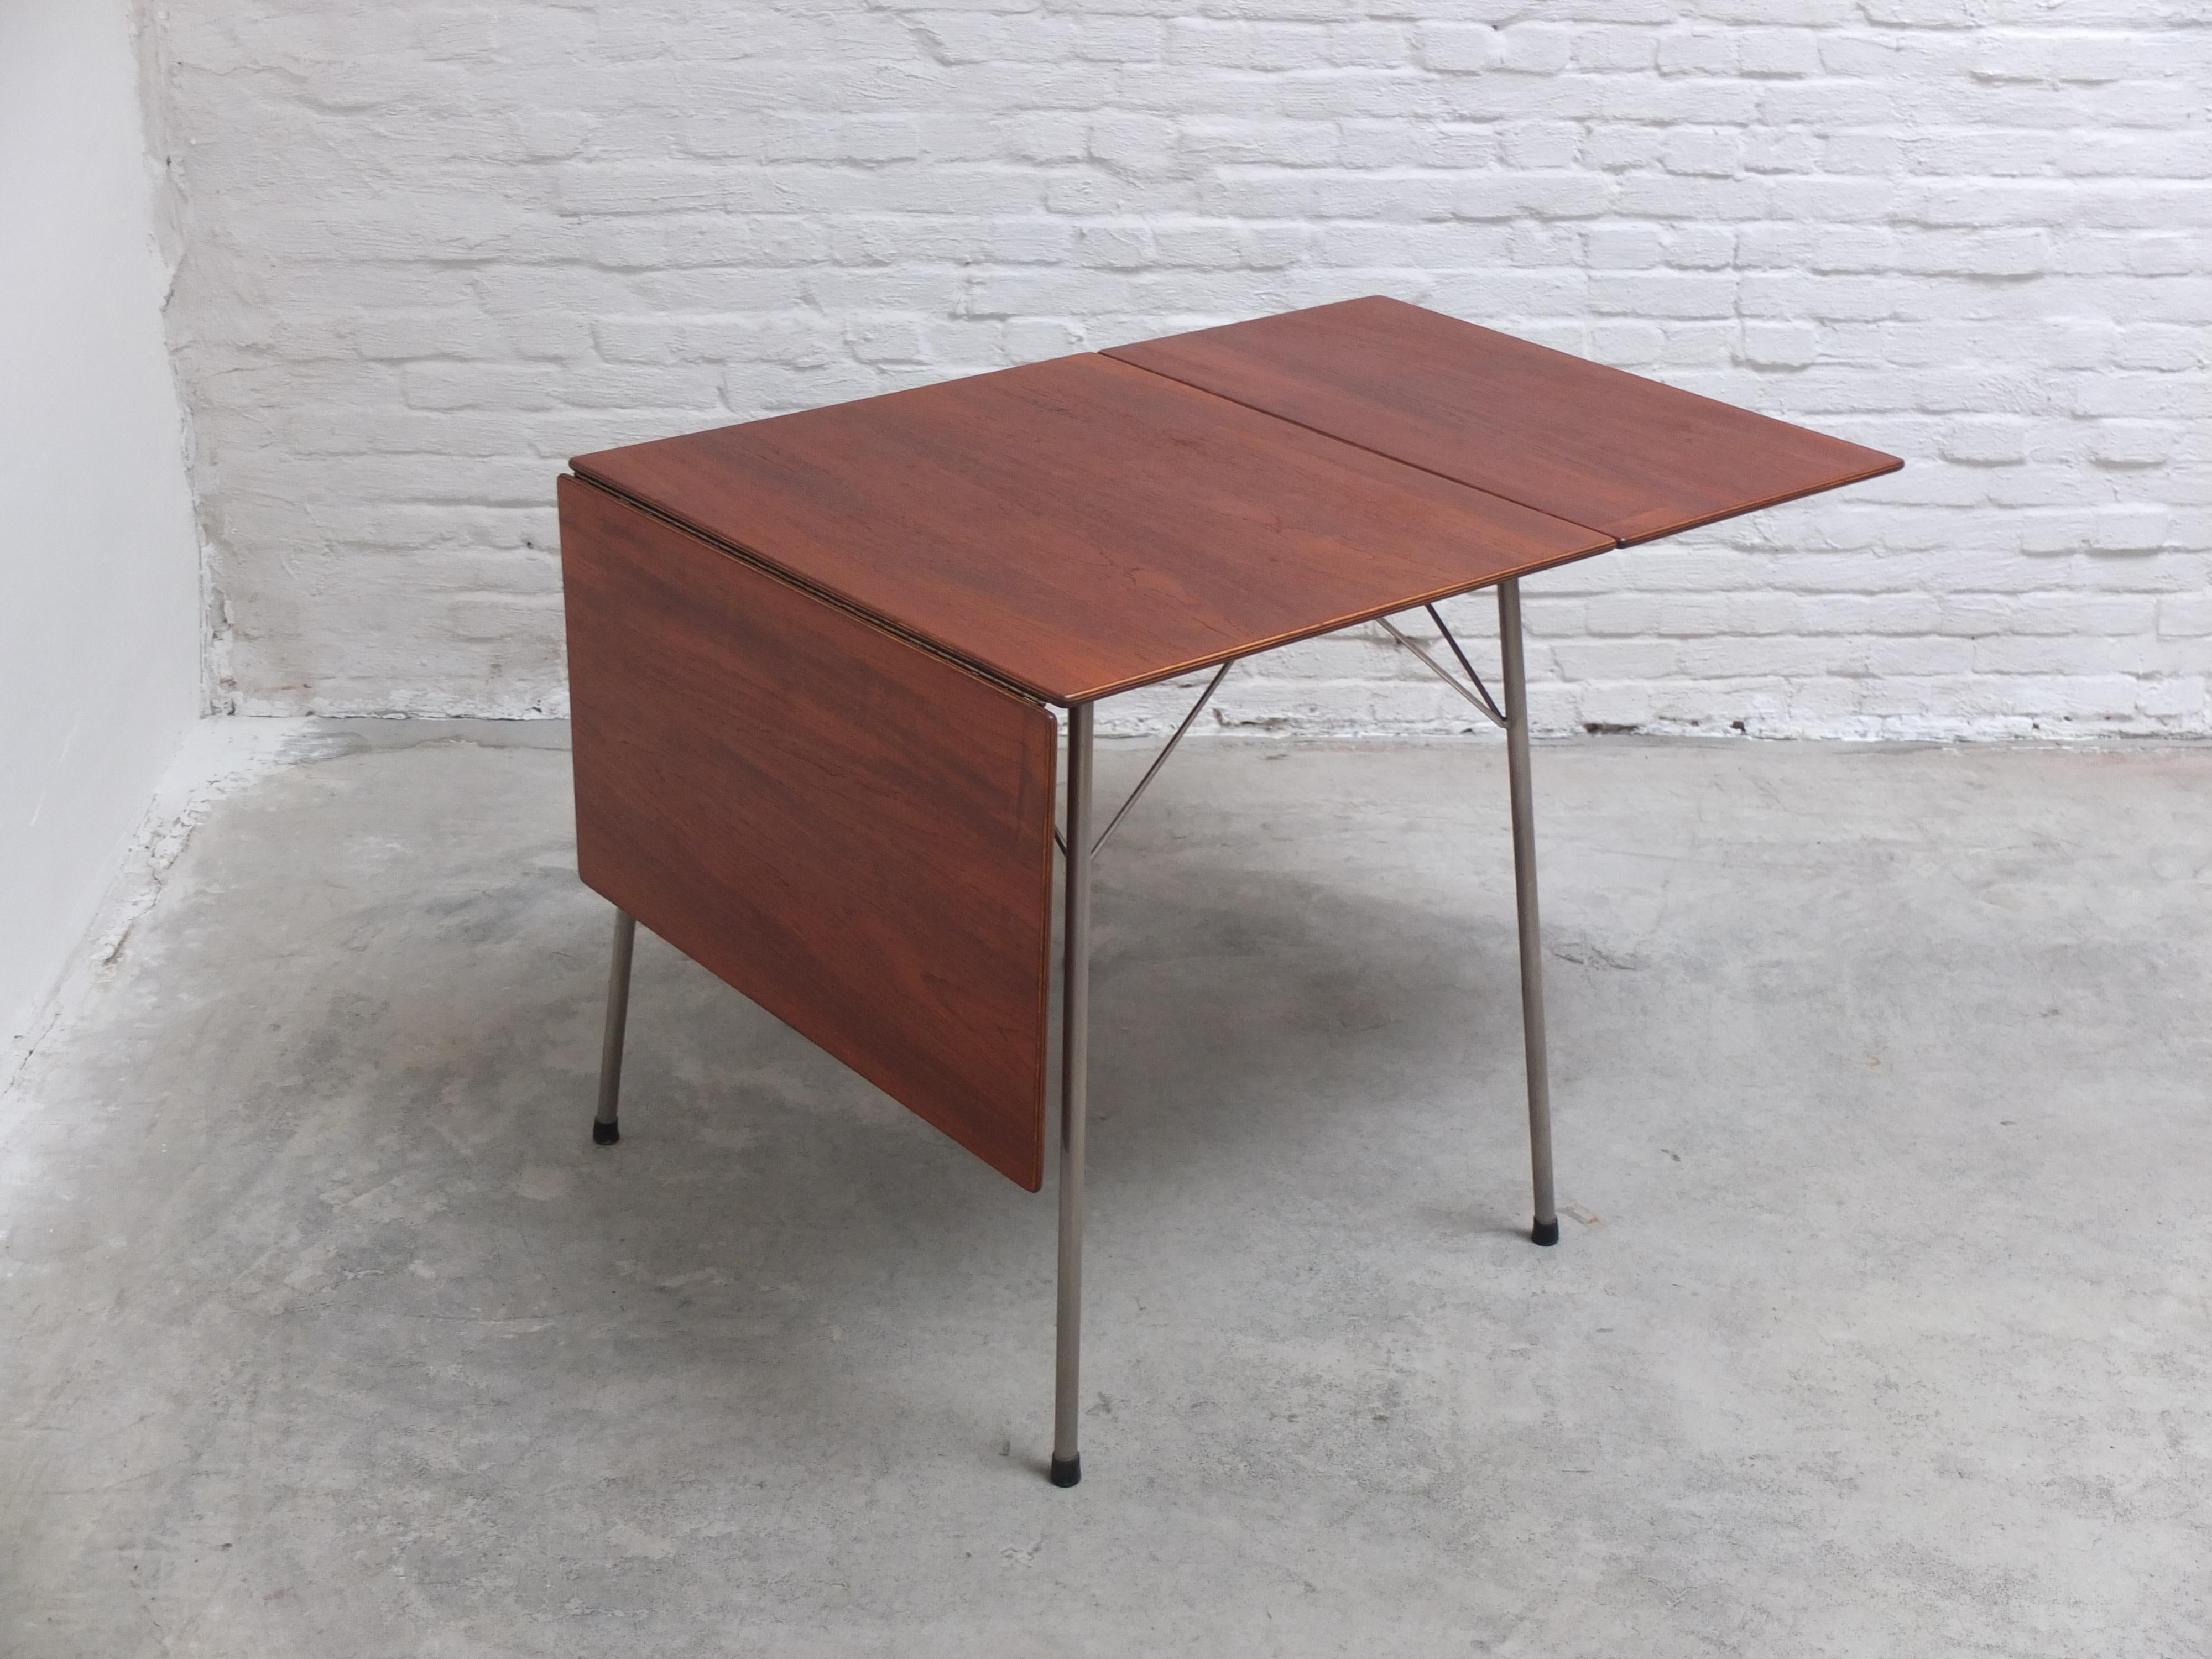 Rare model ‘3601’ small dining table or ‘camping table’ designed by Arne Jacobsen for Fritz Hansen in 1955. This table has been only produced for a couple of years during the 1950s and is therefor hard to find. The top is made of teak wood with